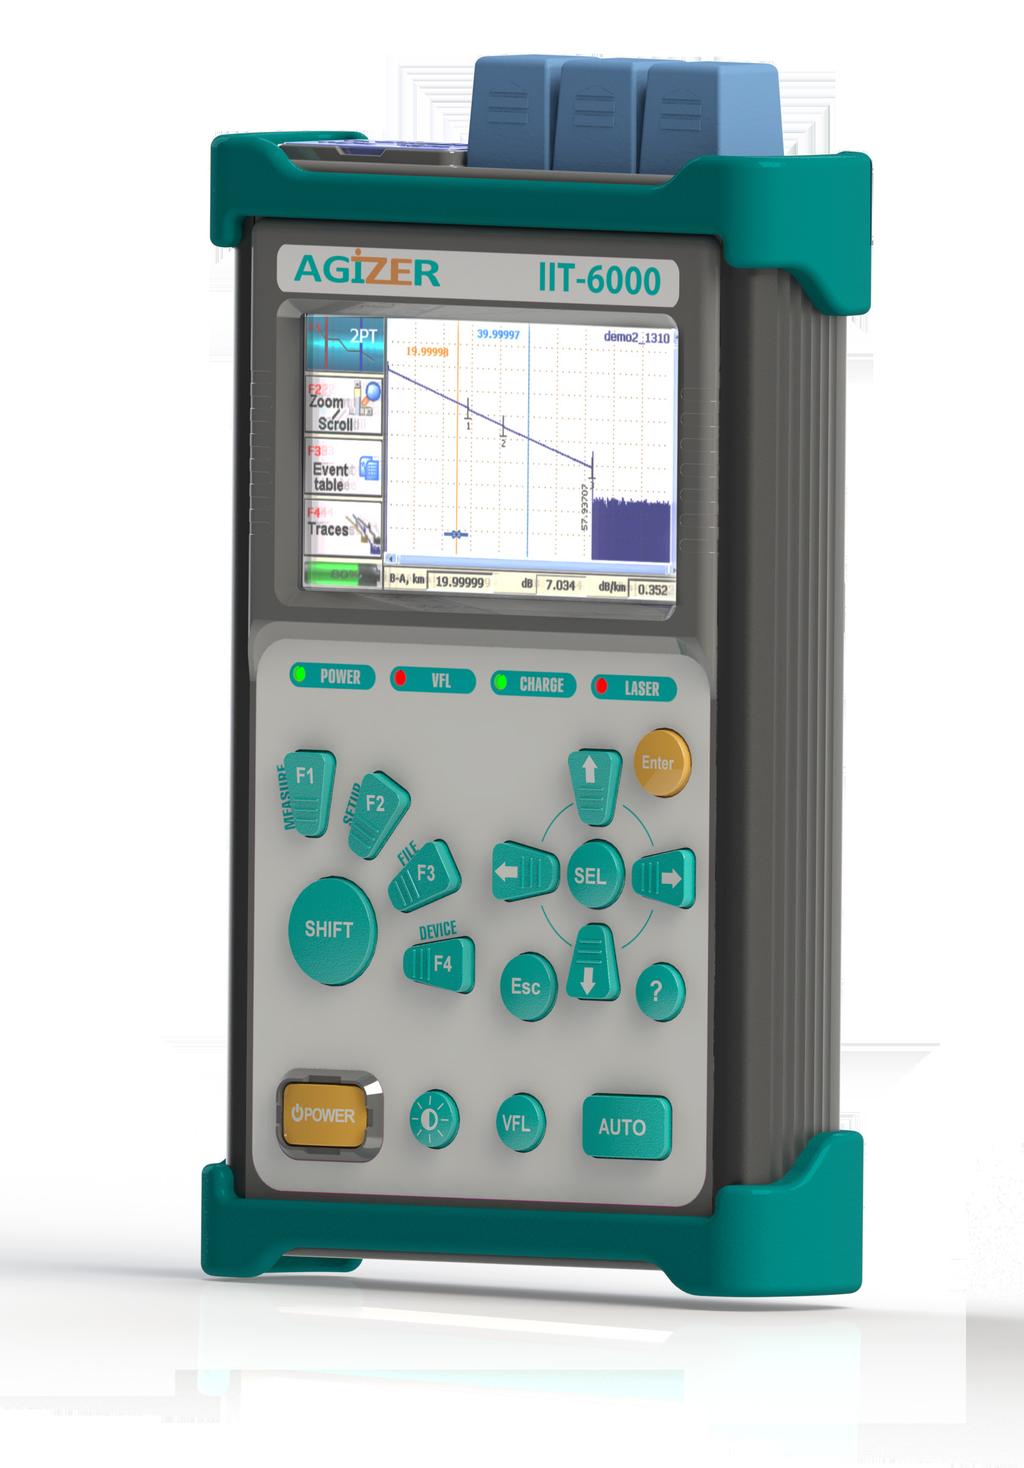 PSP) for convenient trace analysis right in the field.